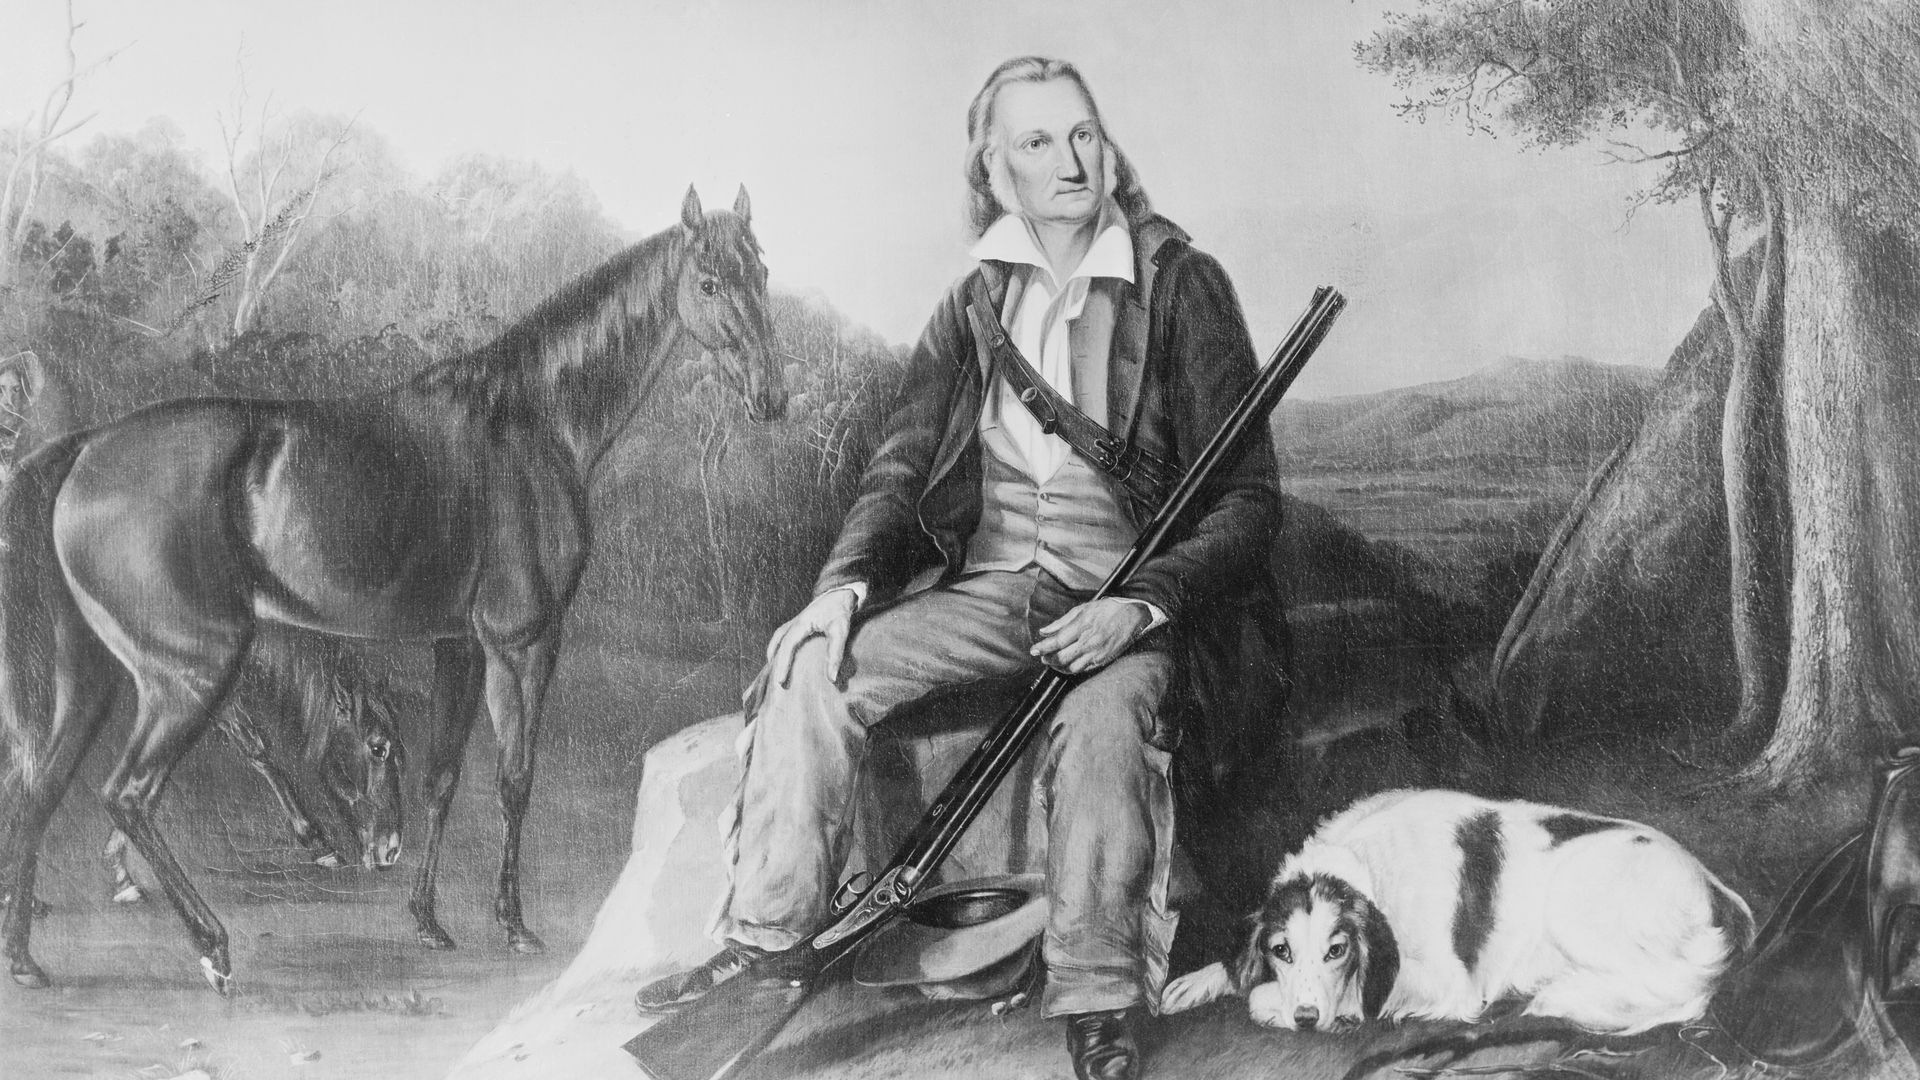 John James Audubon painting in landscape holding his rifle with his hunting dog and horse by his side. 